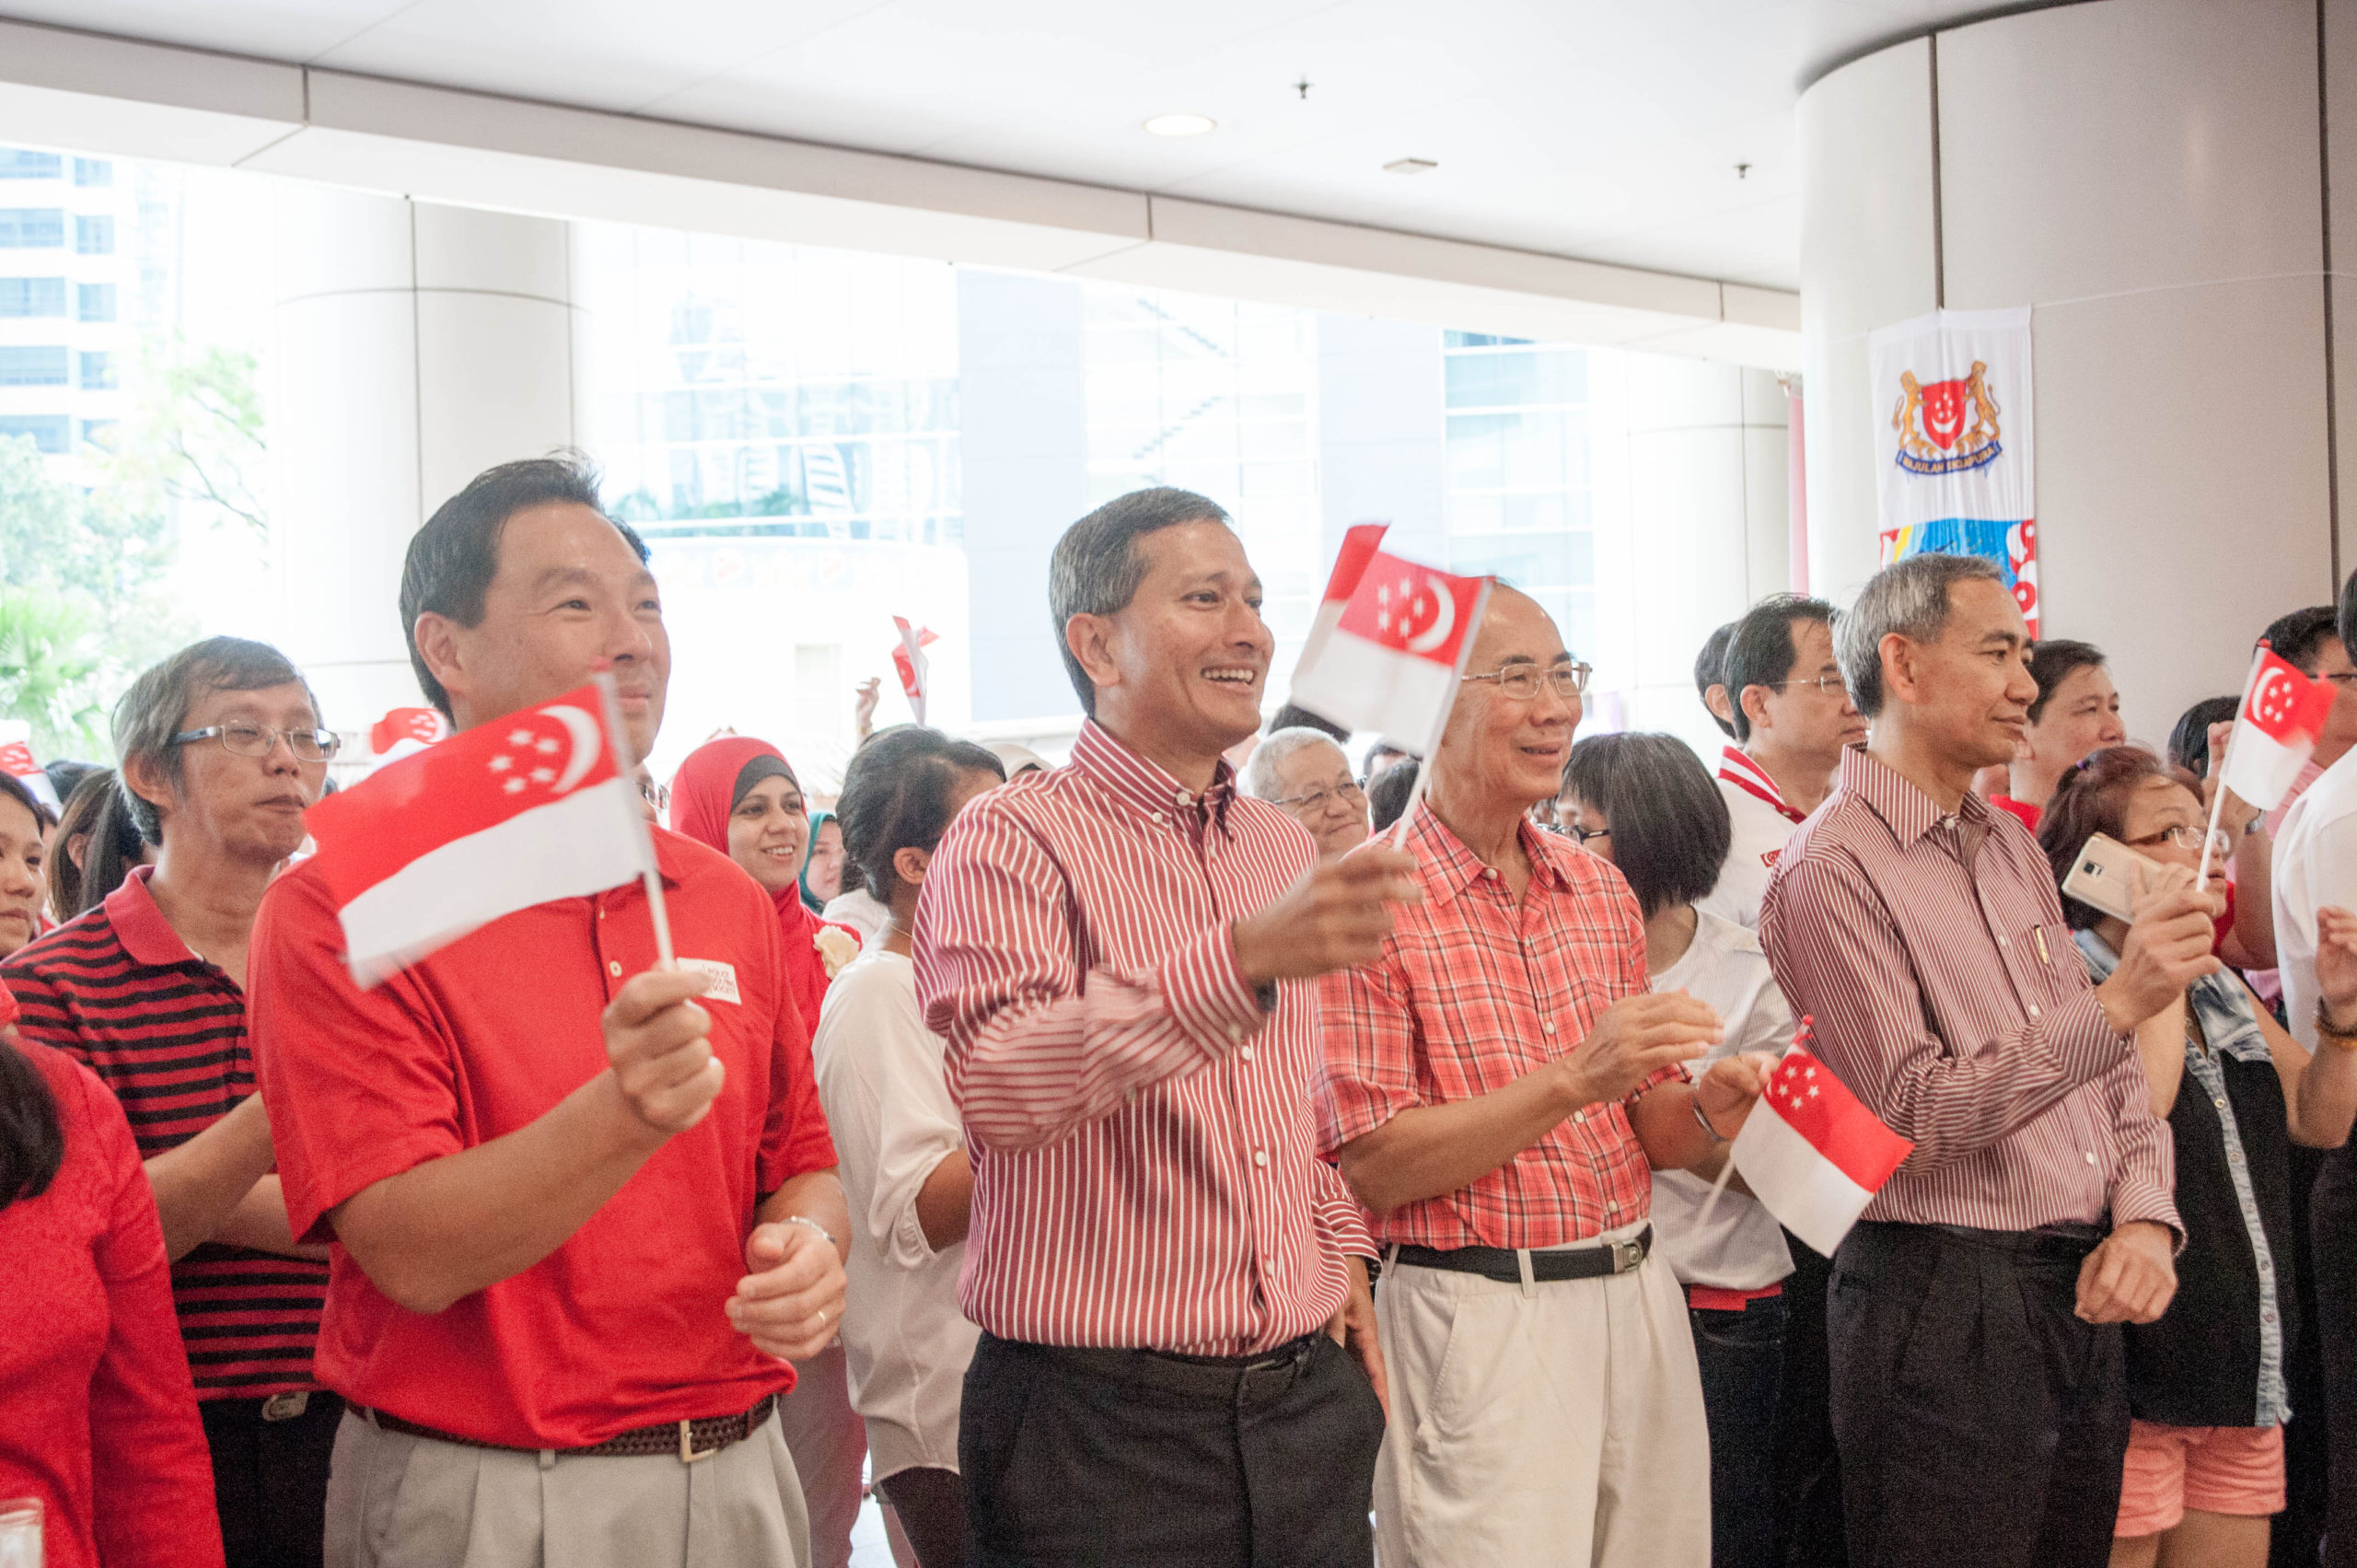 Dr Vivian Balakrishnan and the crowd waving the Singapore flag in a national day event